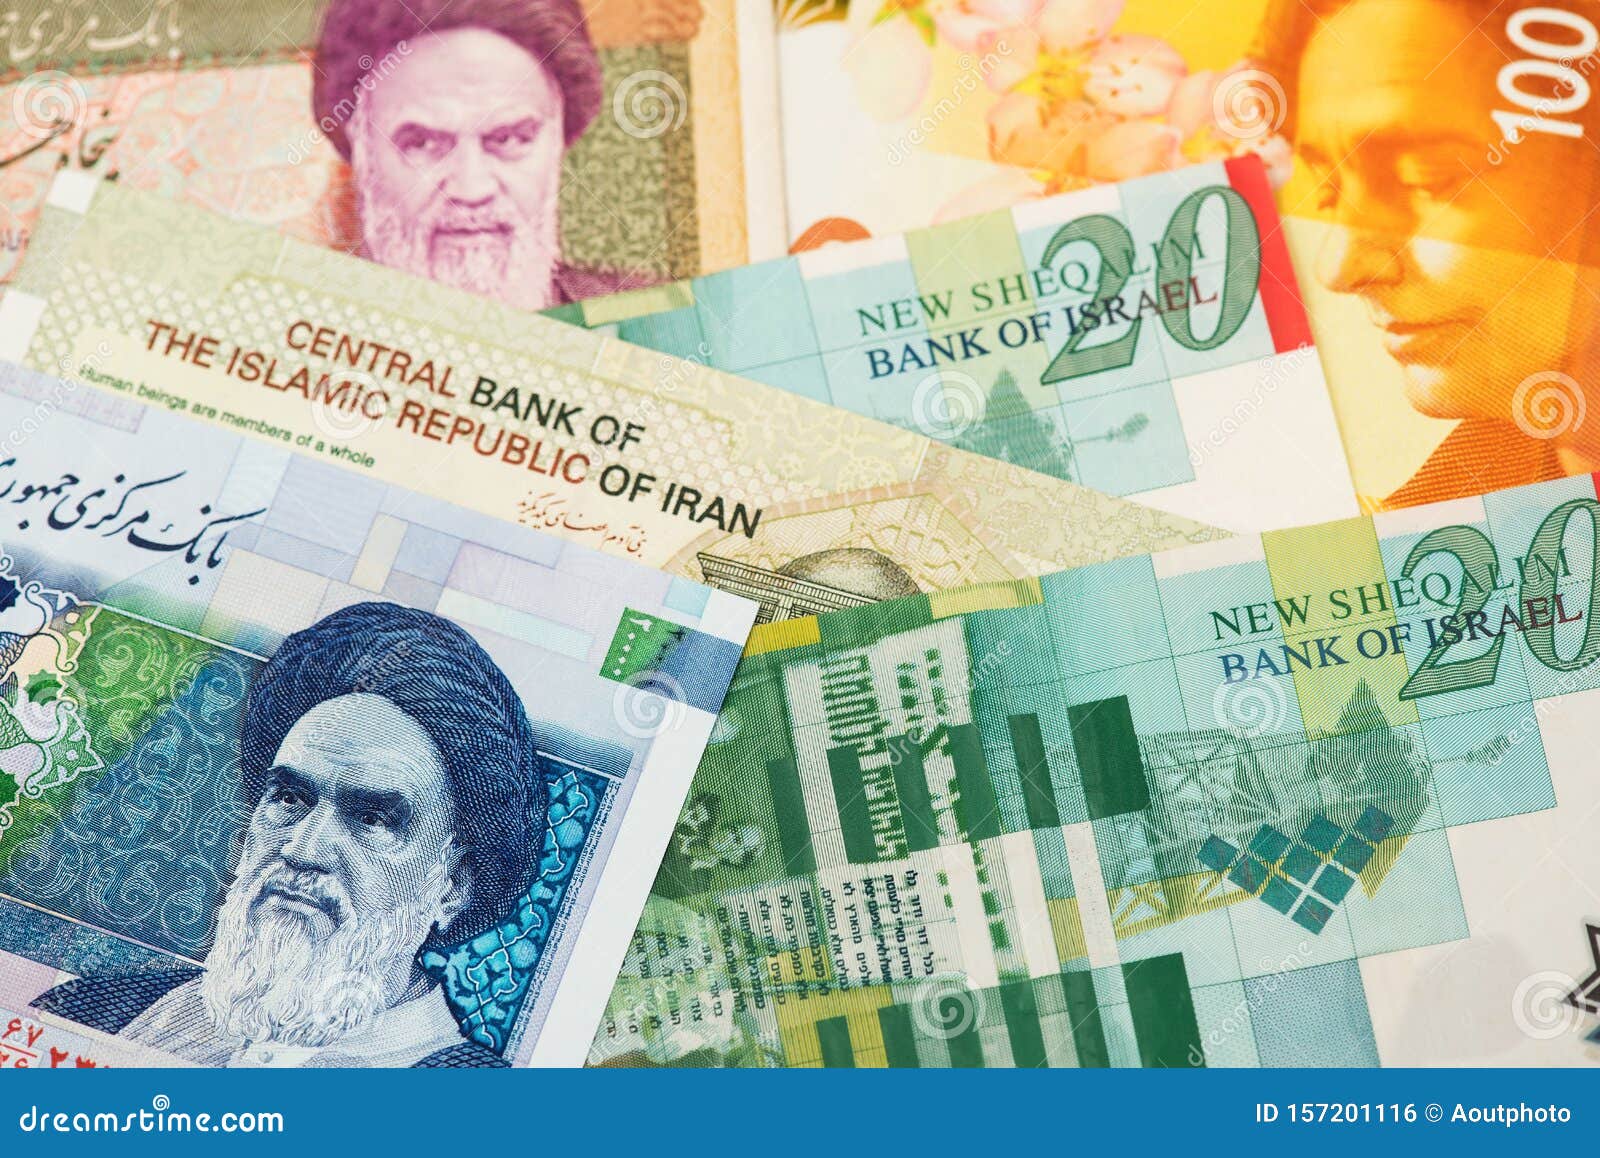 iran rial and israel shekel currency banknotes. irr ils